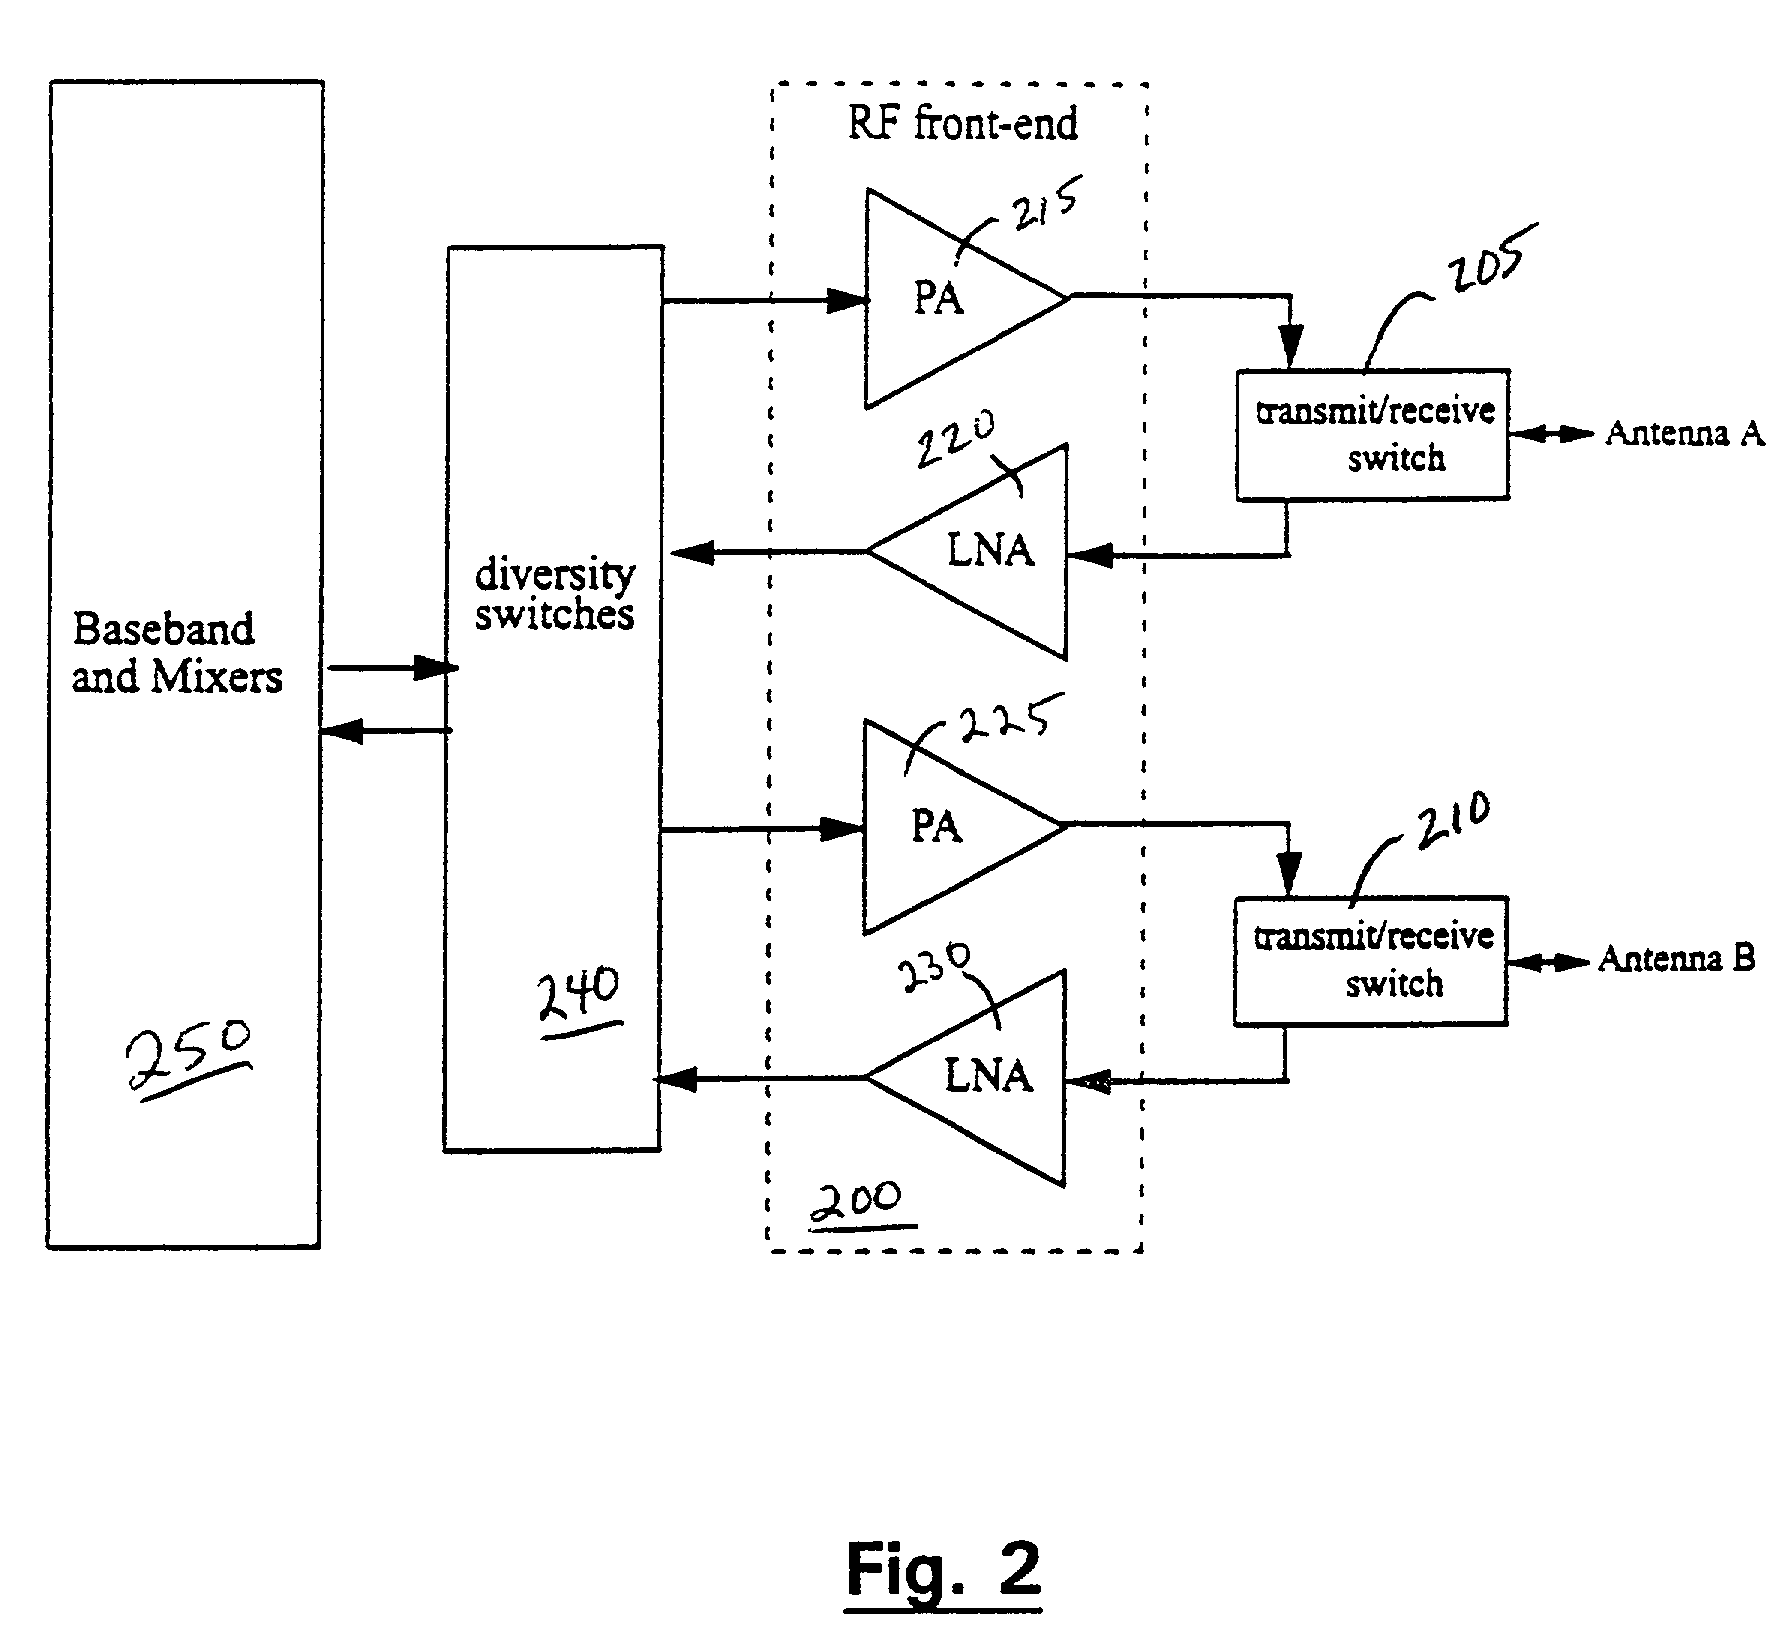 Method and apparatus for signal power loss reduction in RF communication systems